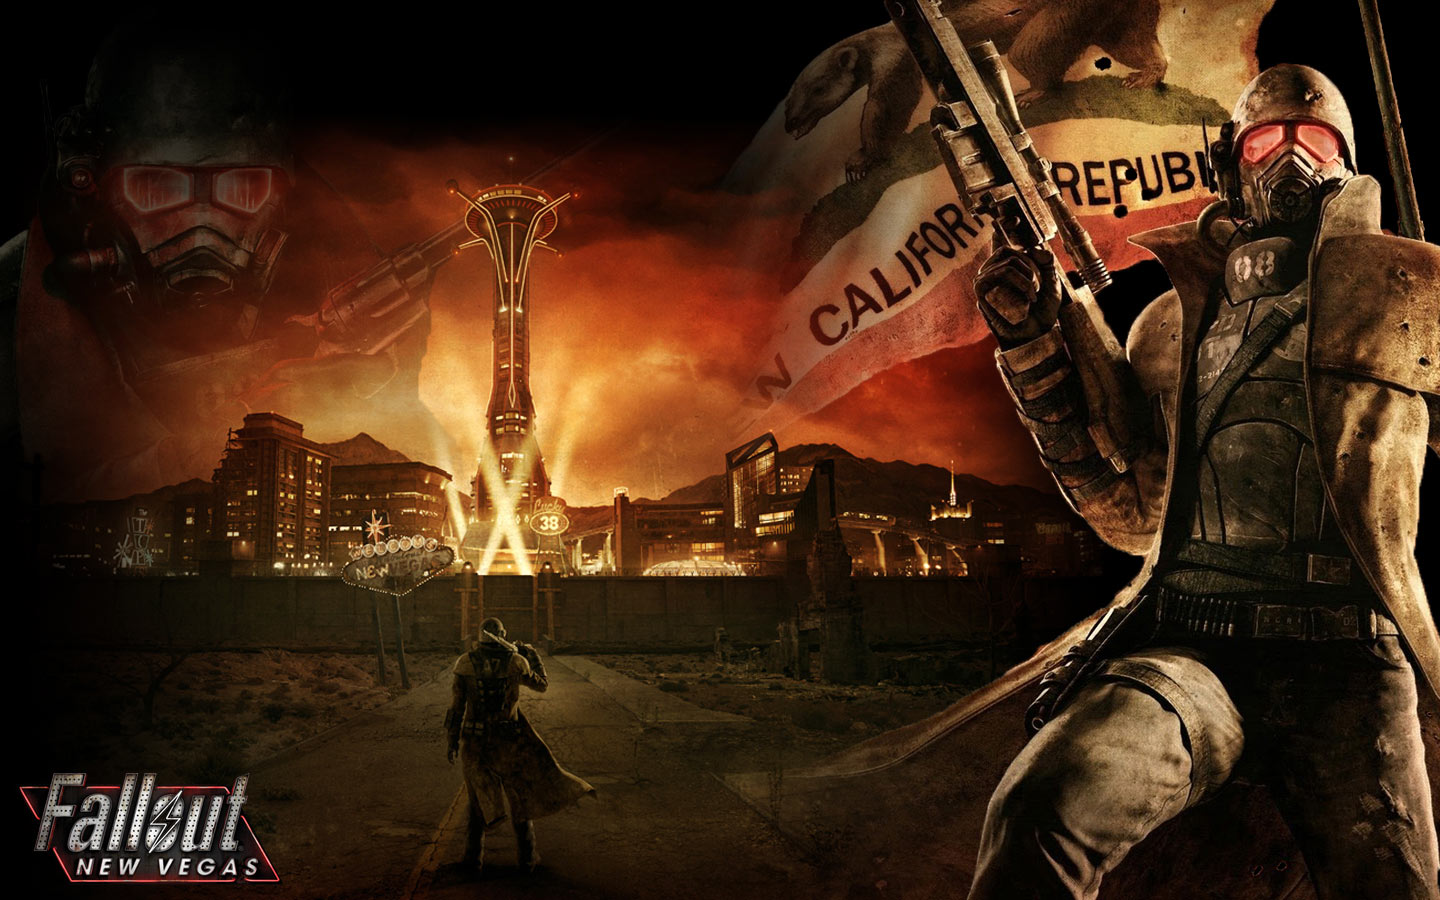 Fallout New Vegas Wallpaper For Your